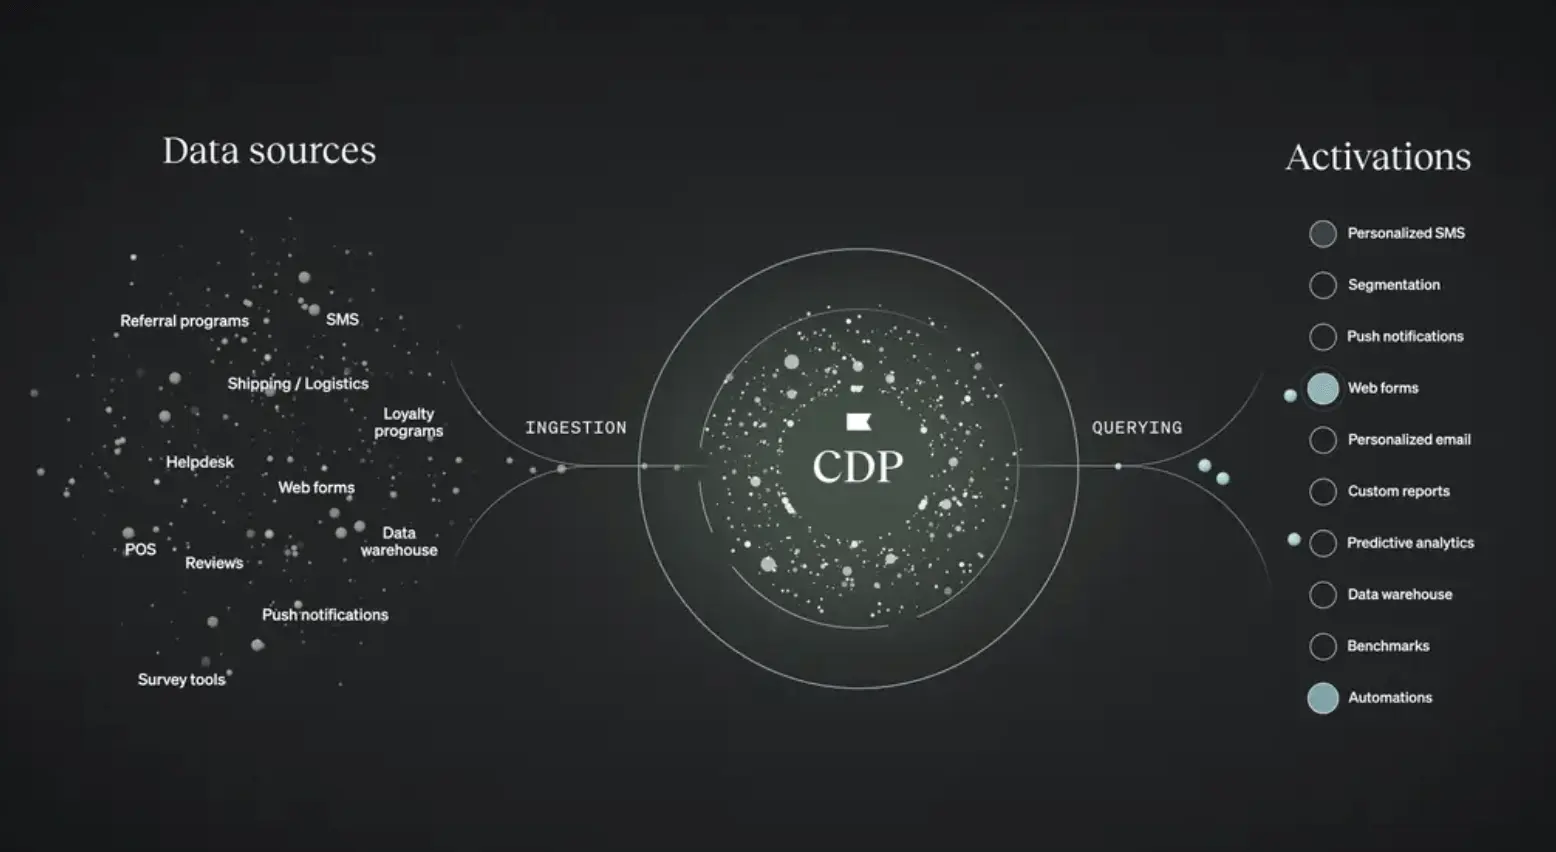  image of data sources flowing into a CDP system and resulting in a variety of activations